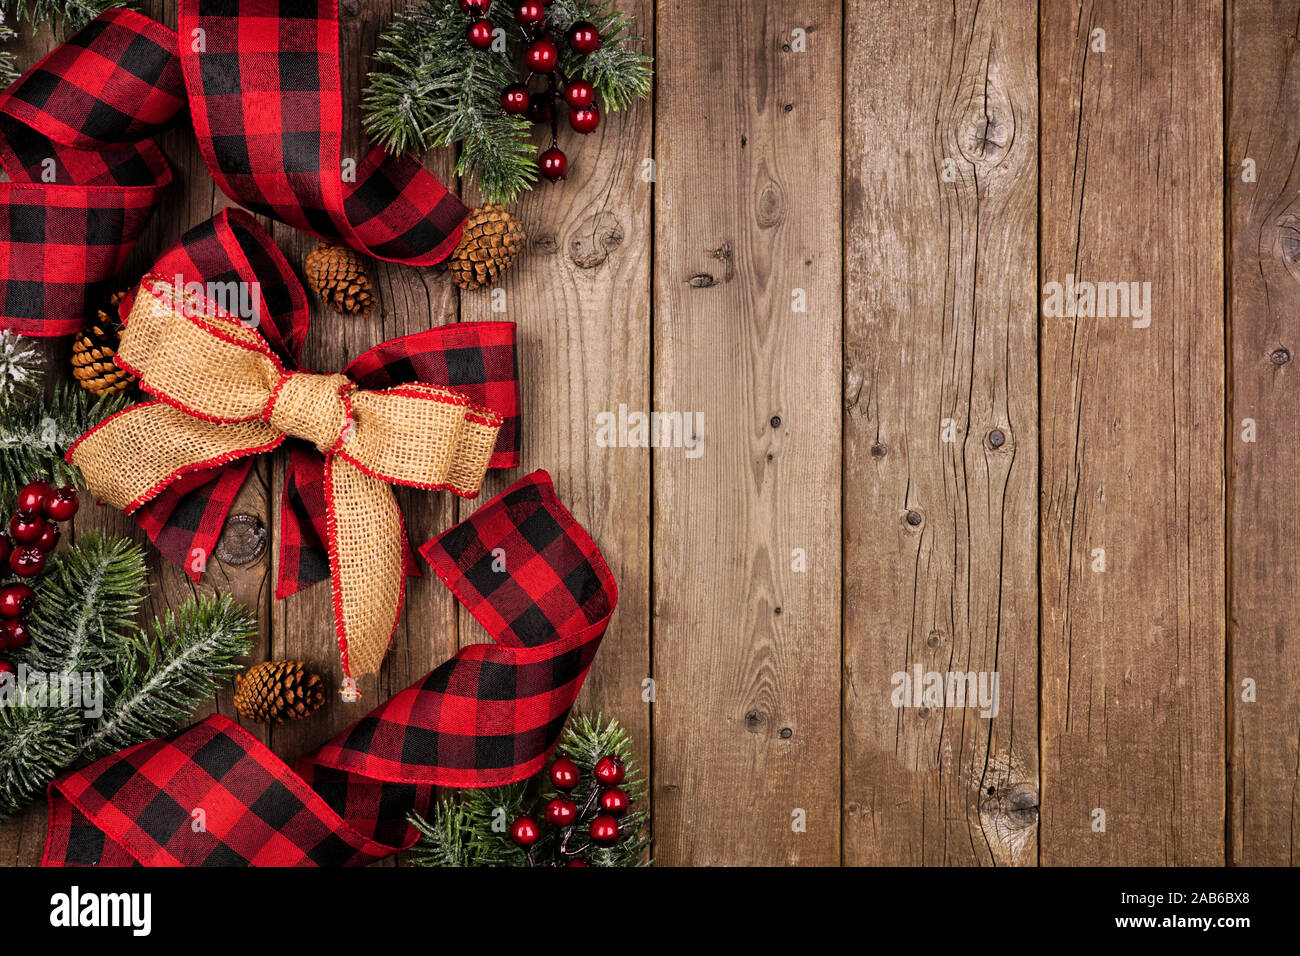 Christmas side border with red and black checked buffalo plaid ribbon ...